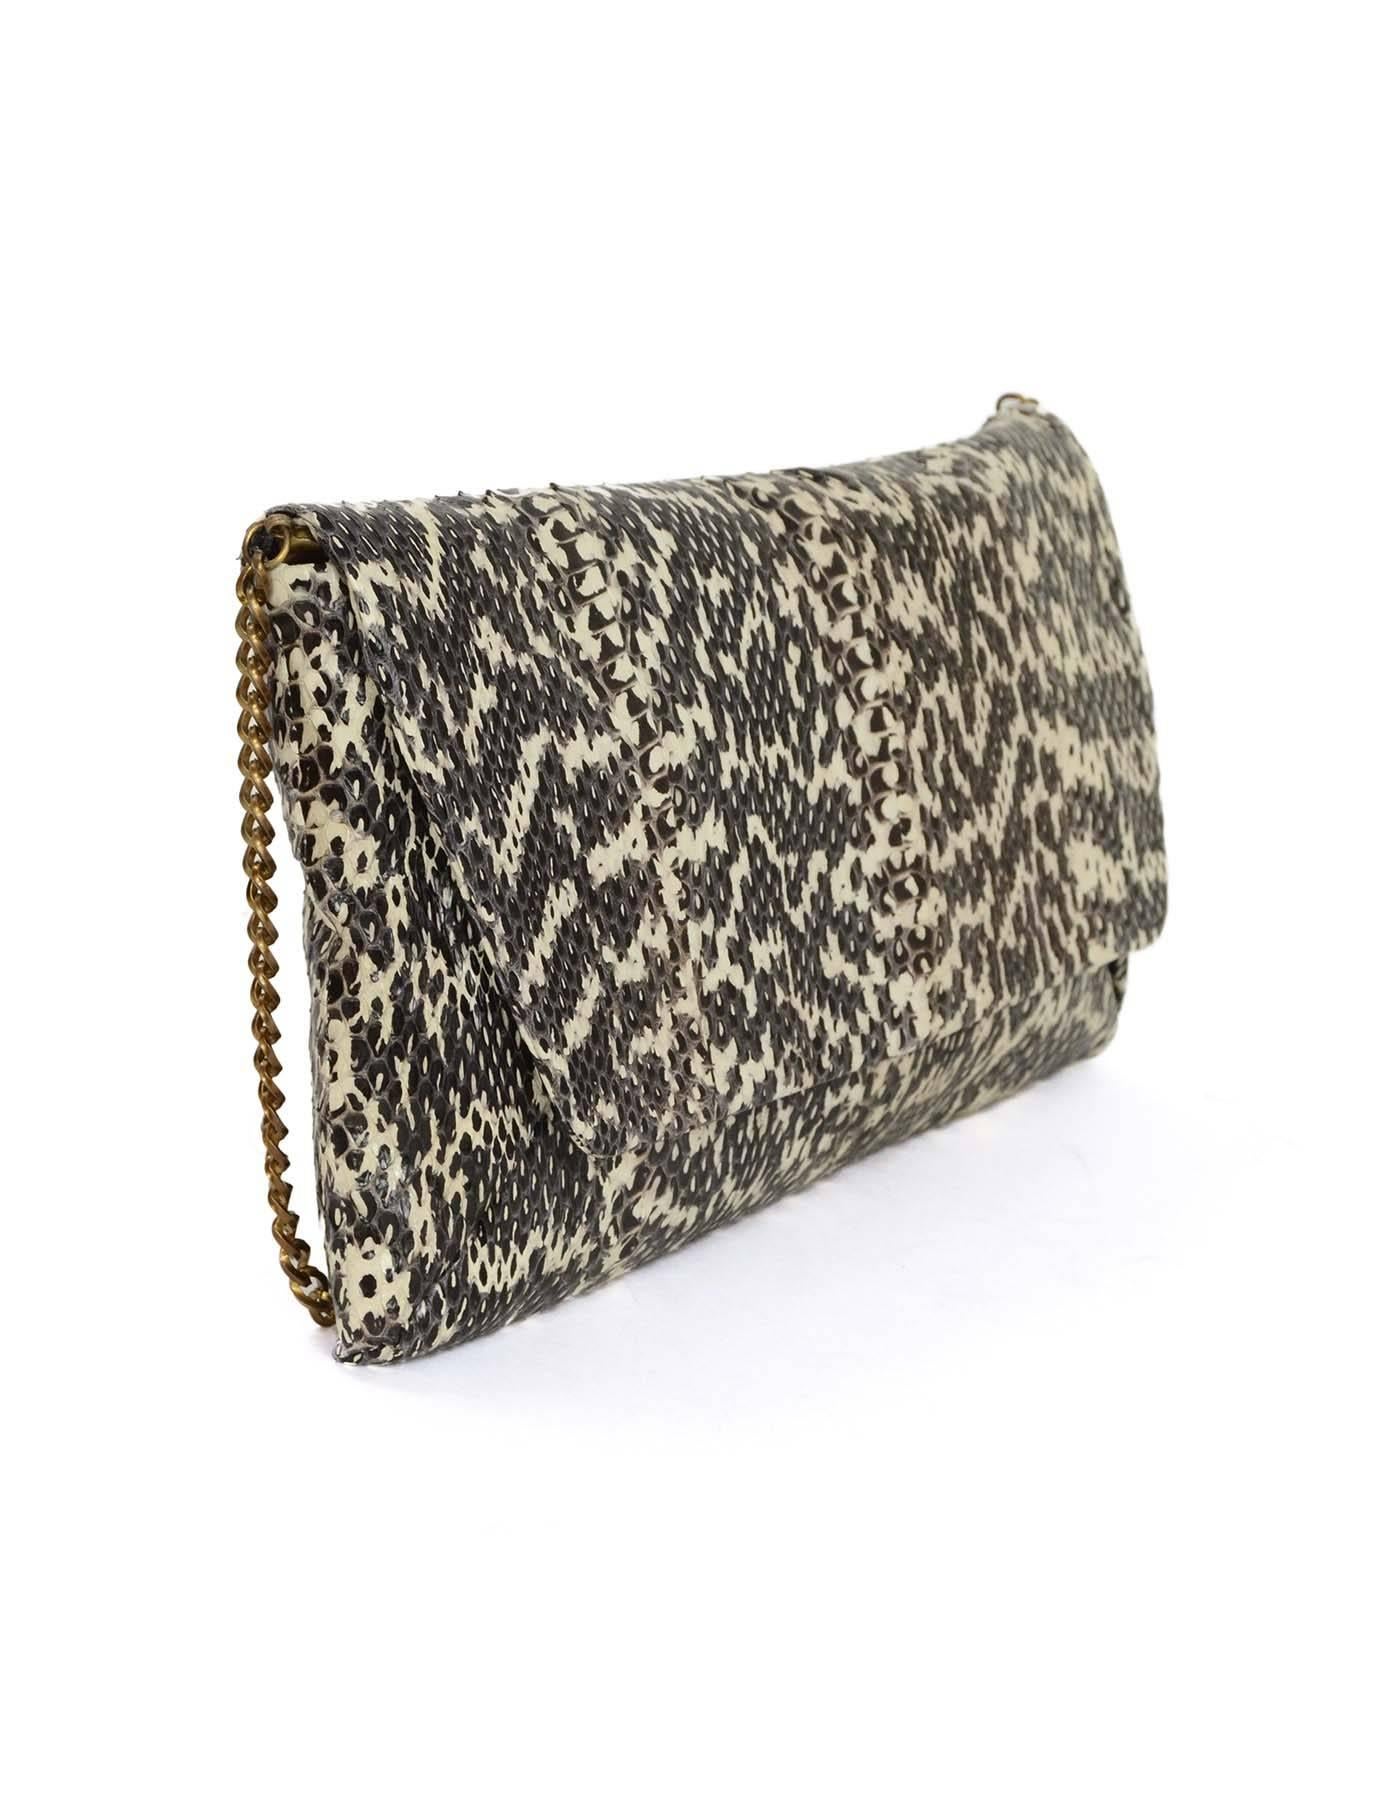 Lanvin Black & Ivory Embossed Snakeskin Clutch 
Features optional chain link shoulder strap
Made In: Italy
Color: Black and ivory
Hardware: Bronze
Materials: Snakeskin embossed leather
Lining: Charcoal satin and black